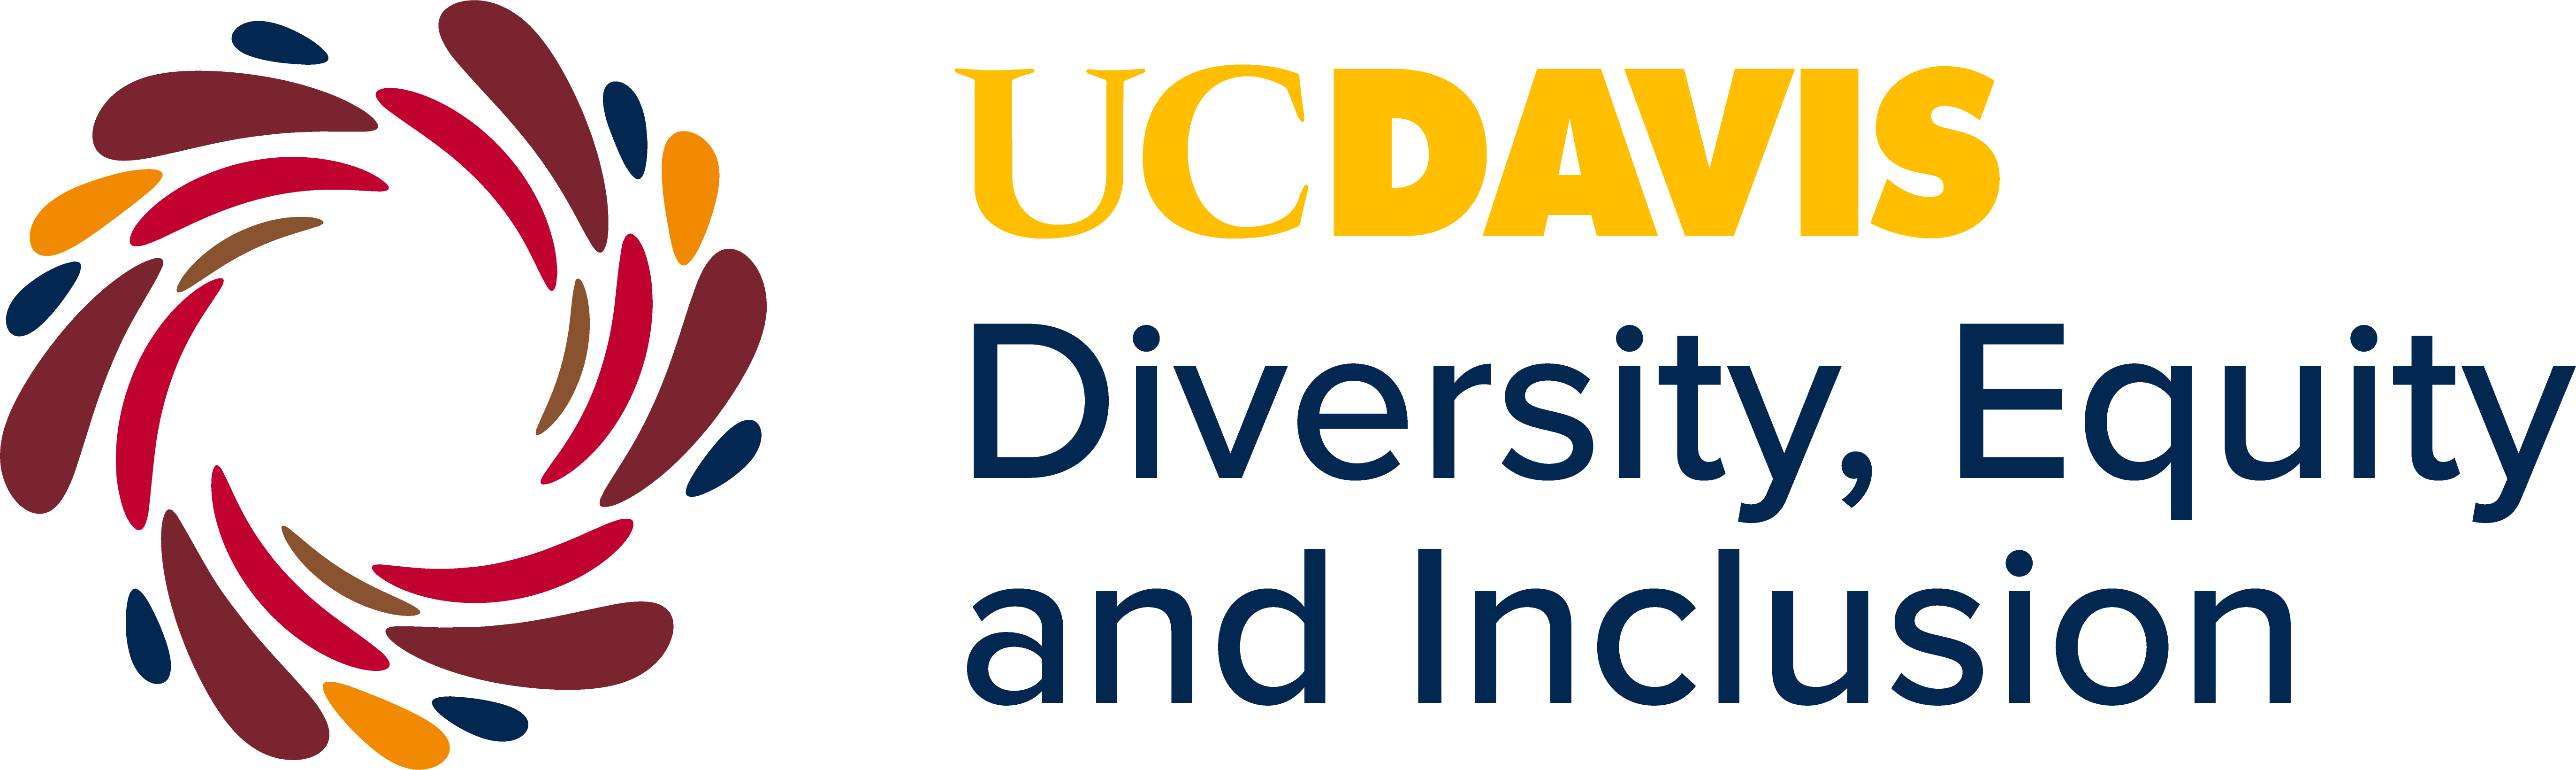 UC Davis Office of Diversity, Equity, and Inclusion